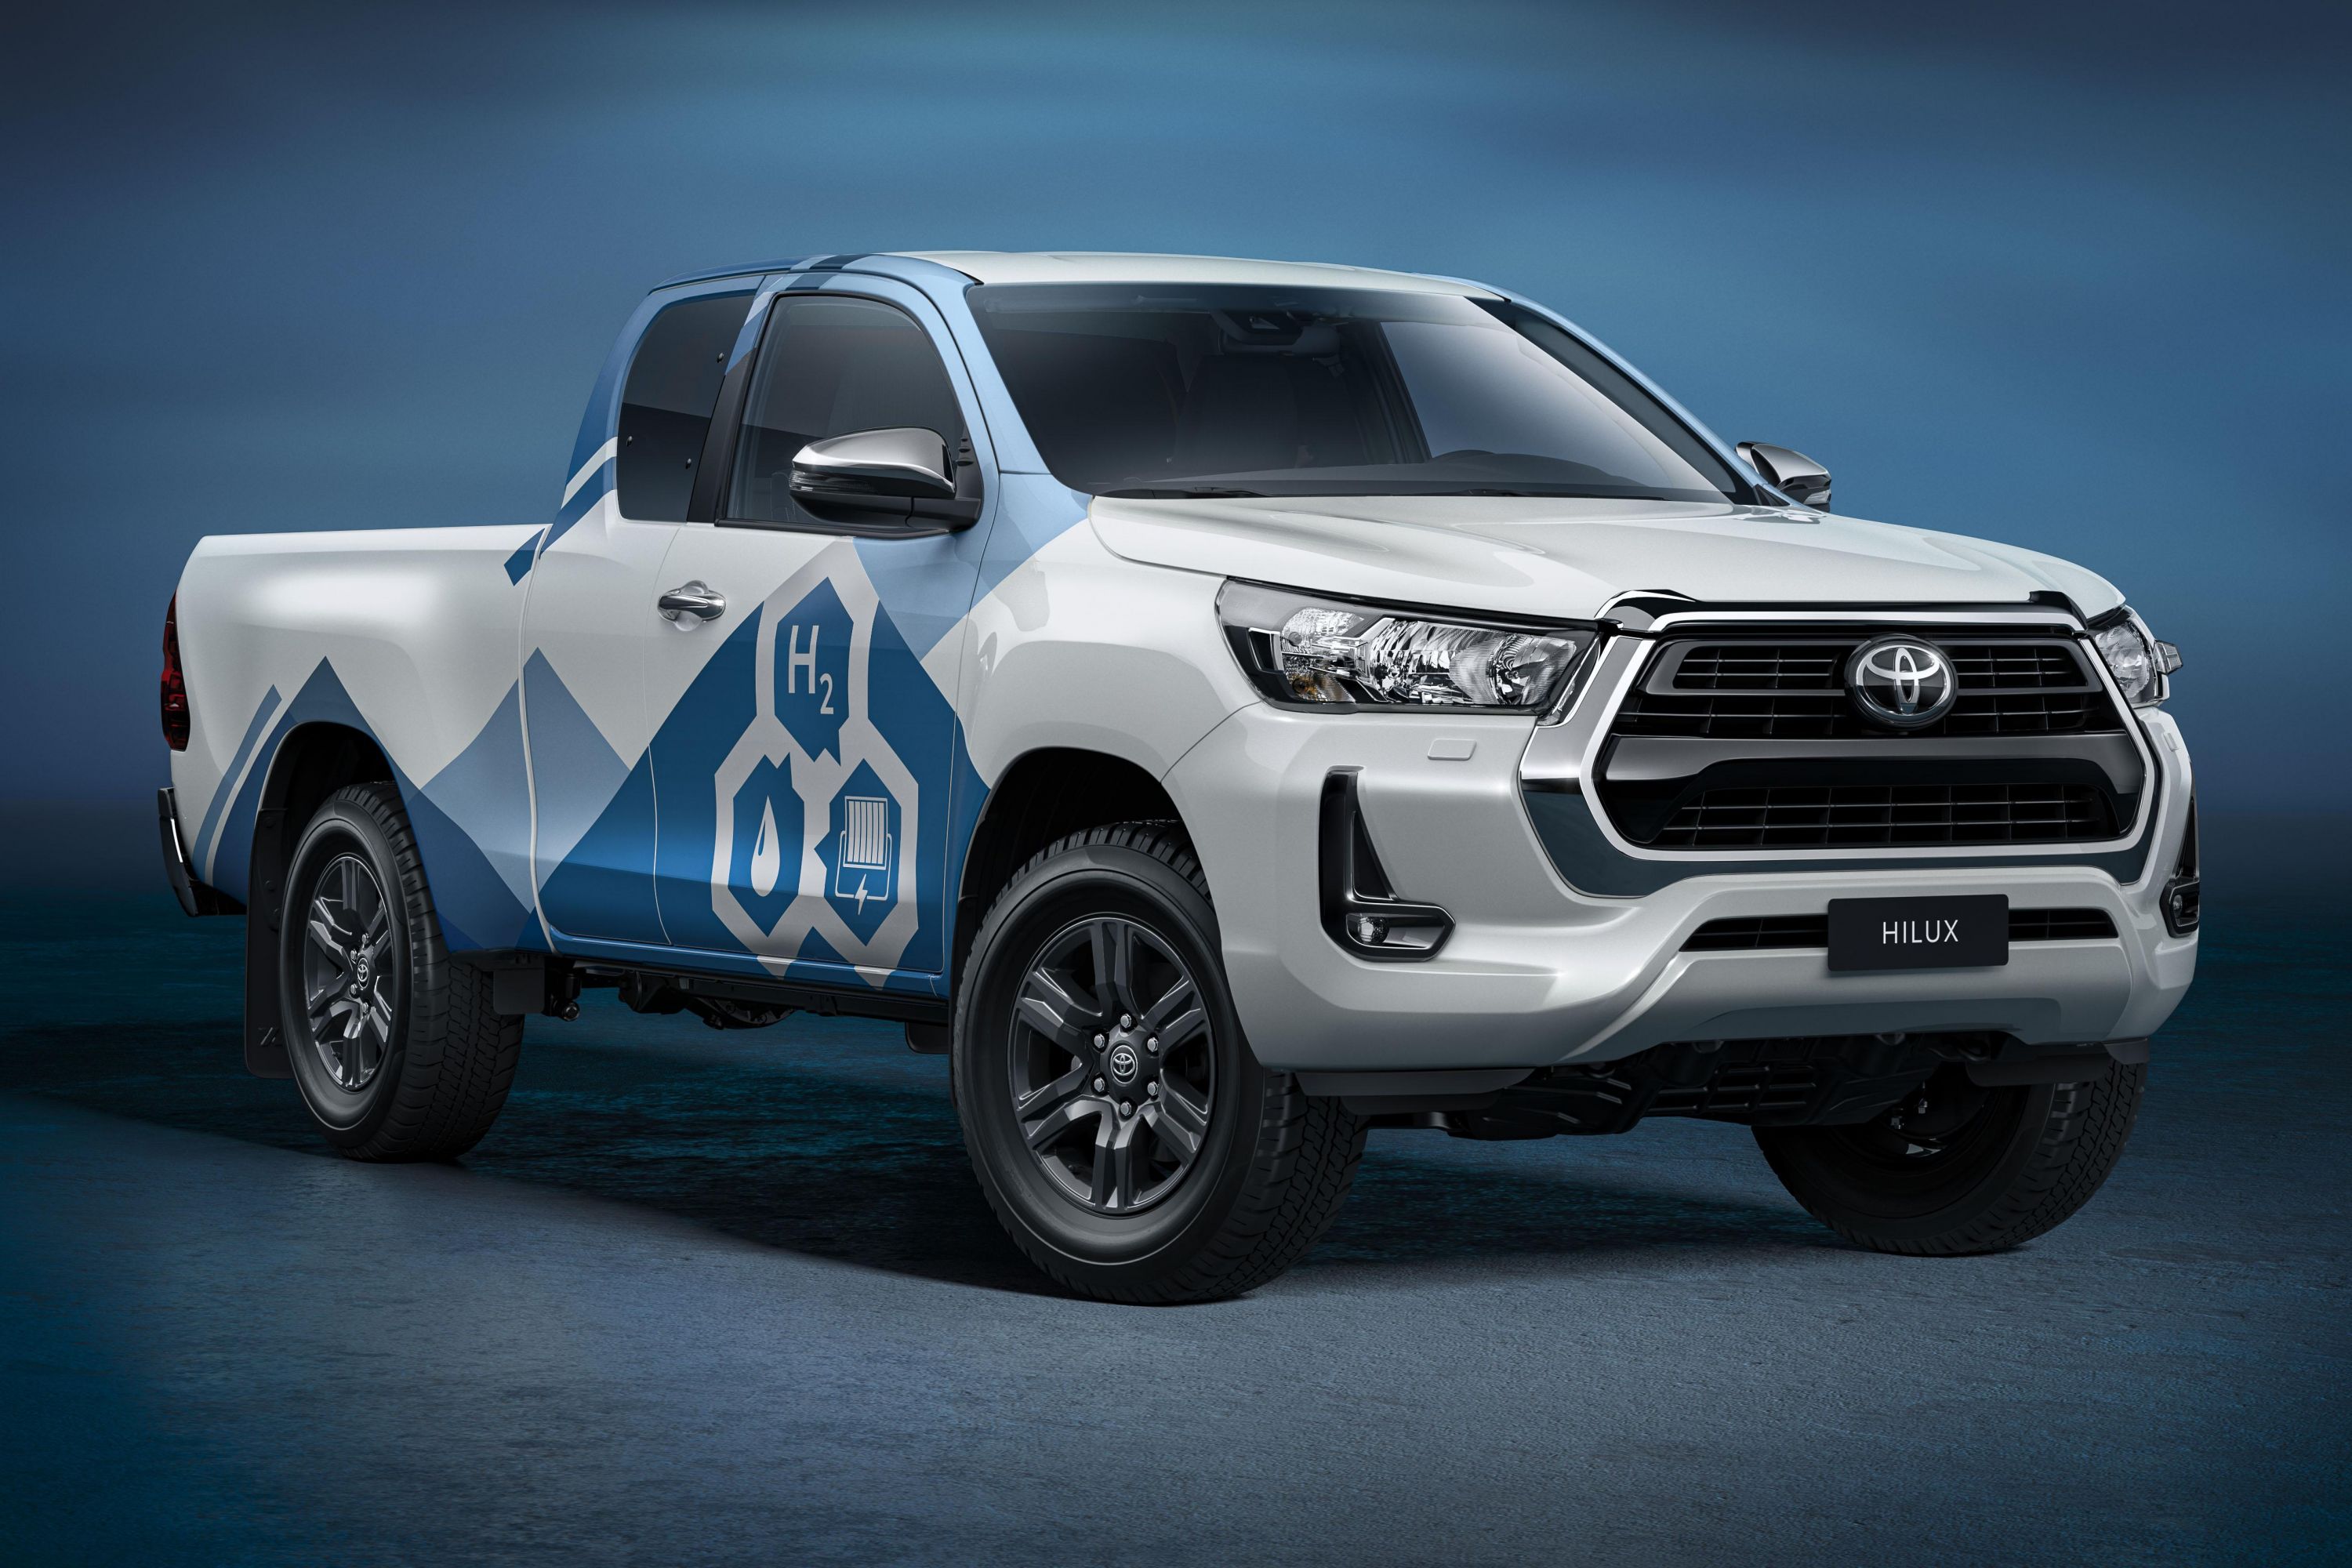 Toyota HiLux Hydrogen fuel cell prototypes to be built in 2023 CarExpert